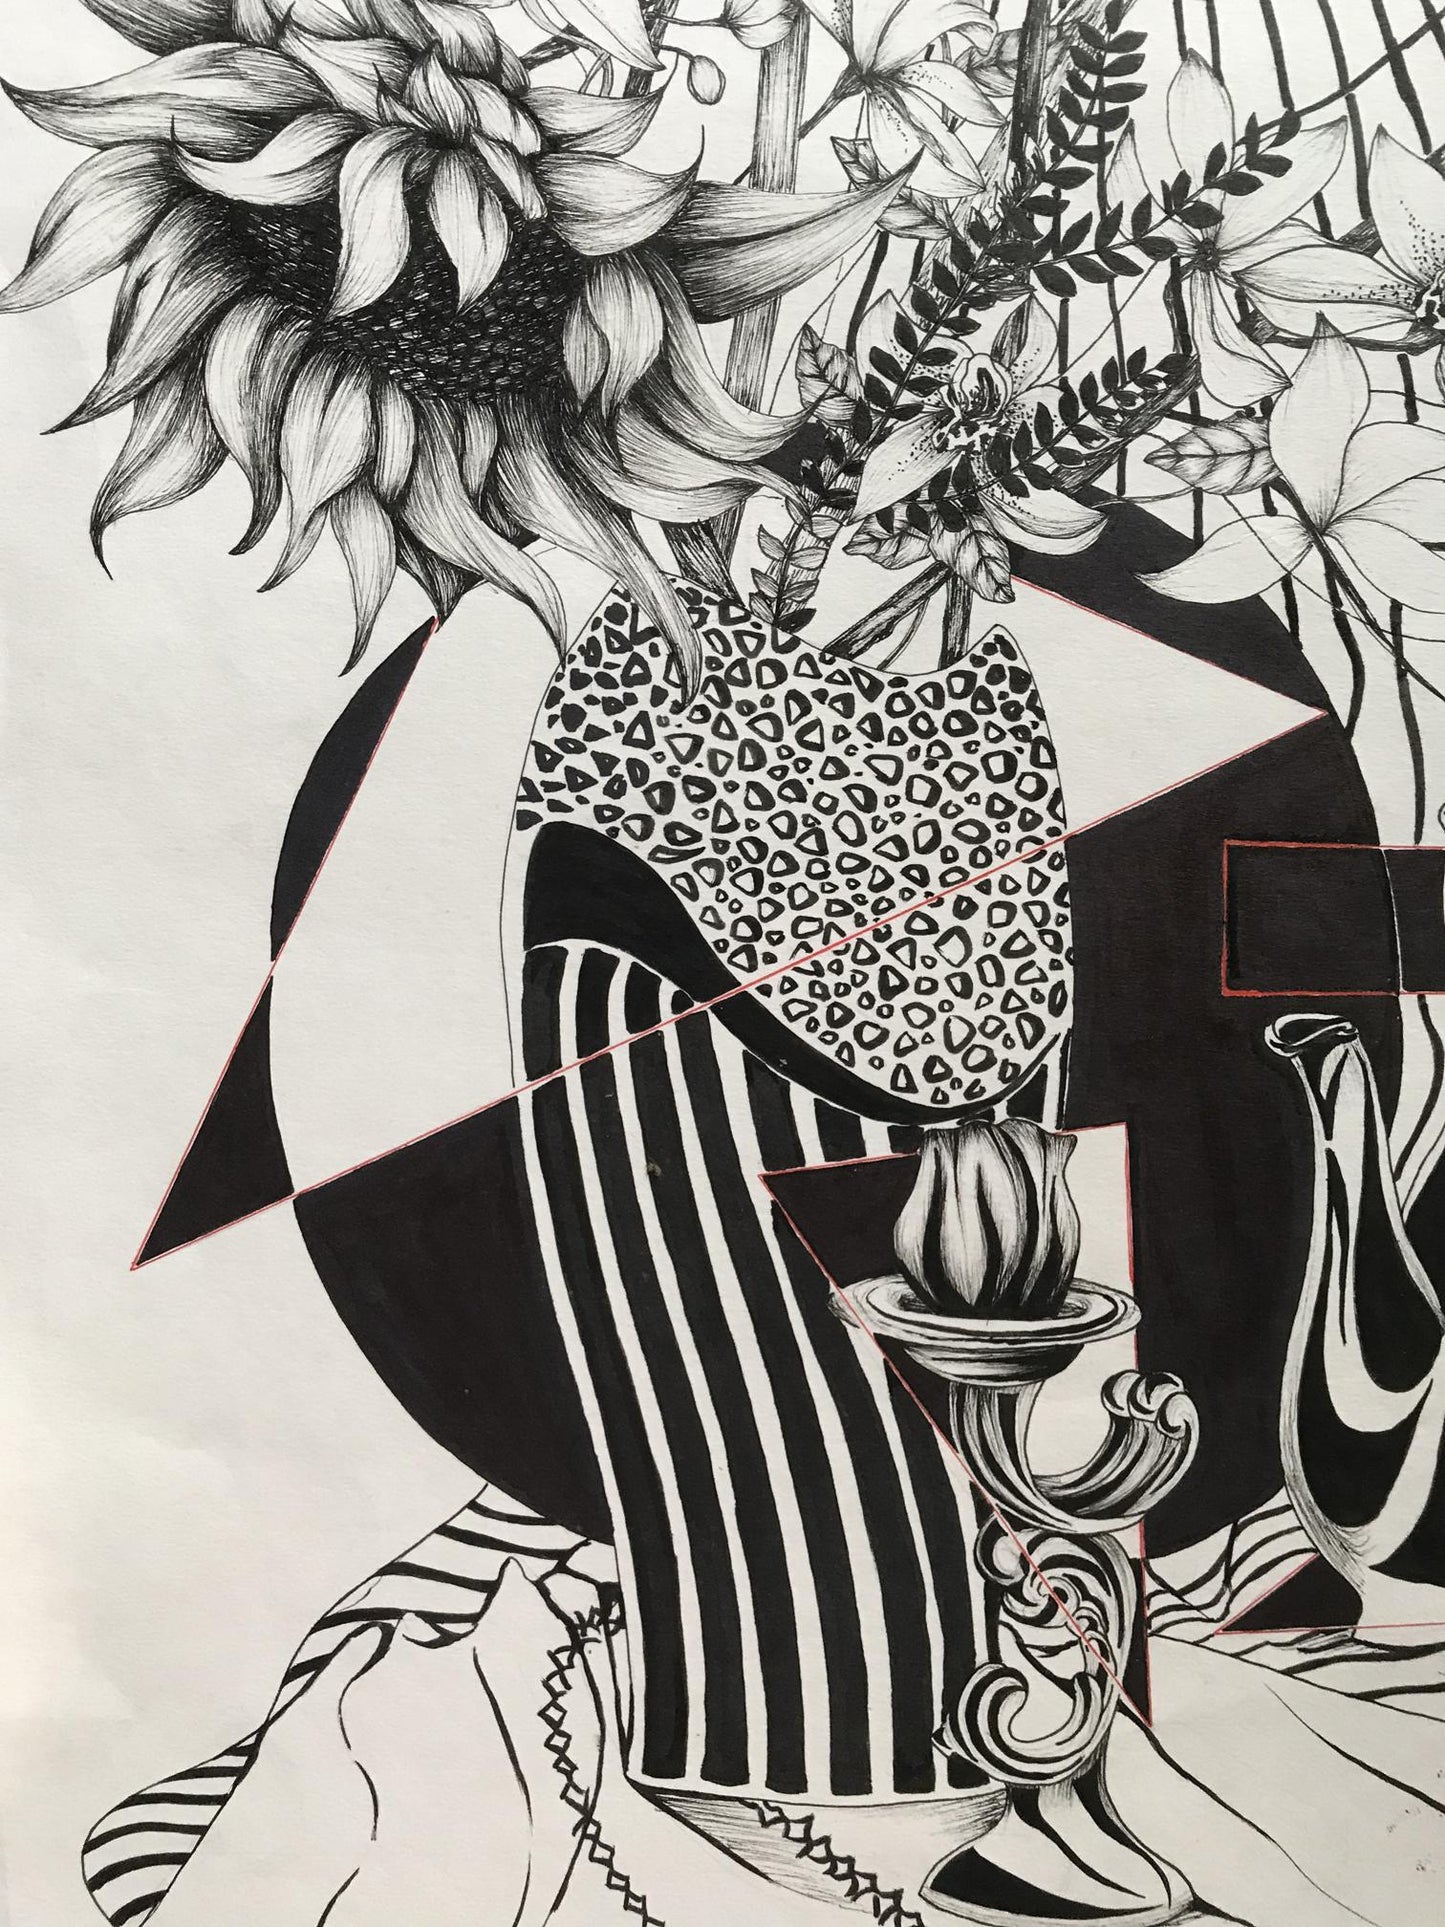 The abstract pen creation by an unknown artist delves into the imagery of sunflowers and lilies